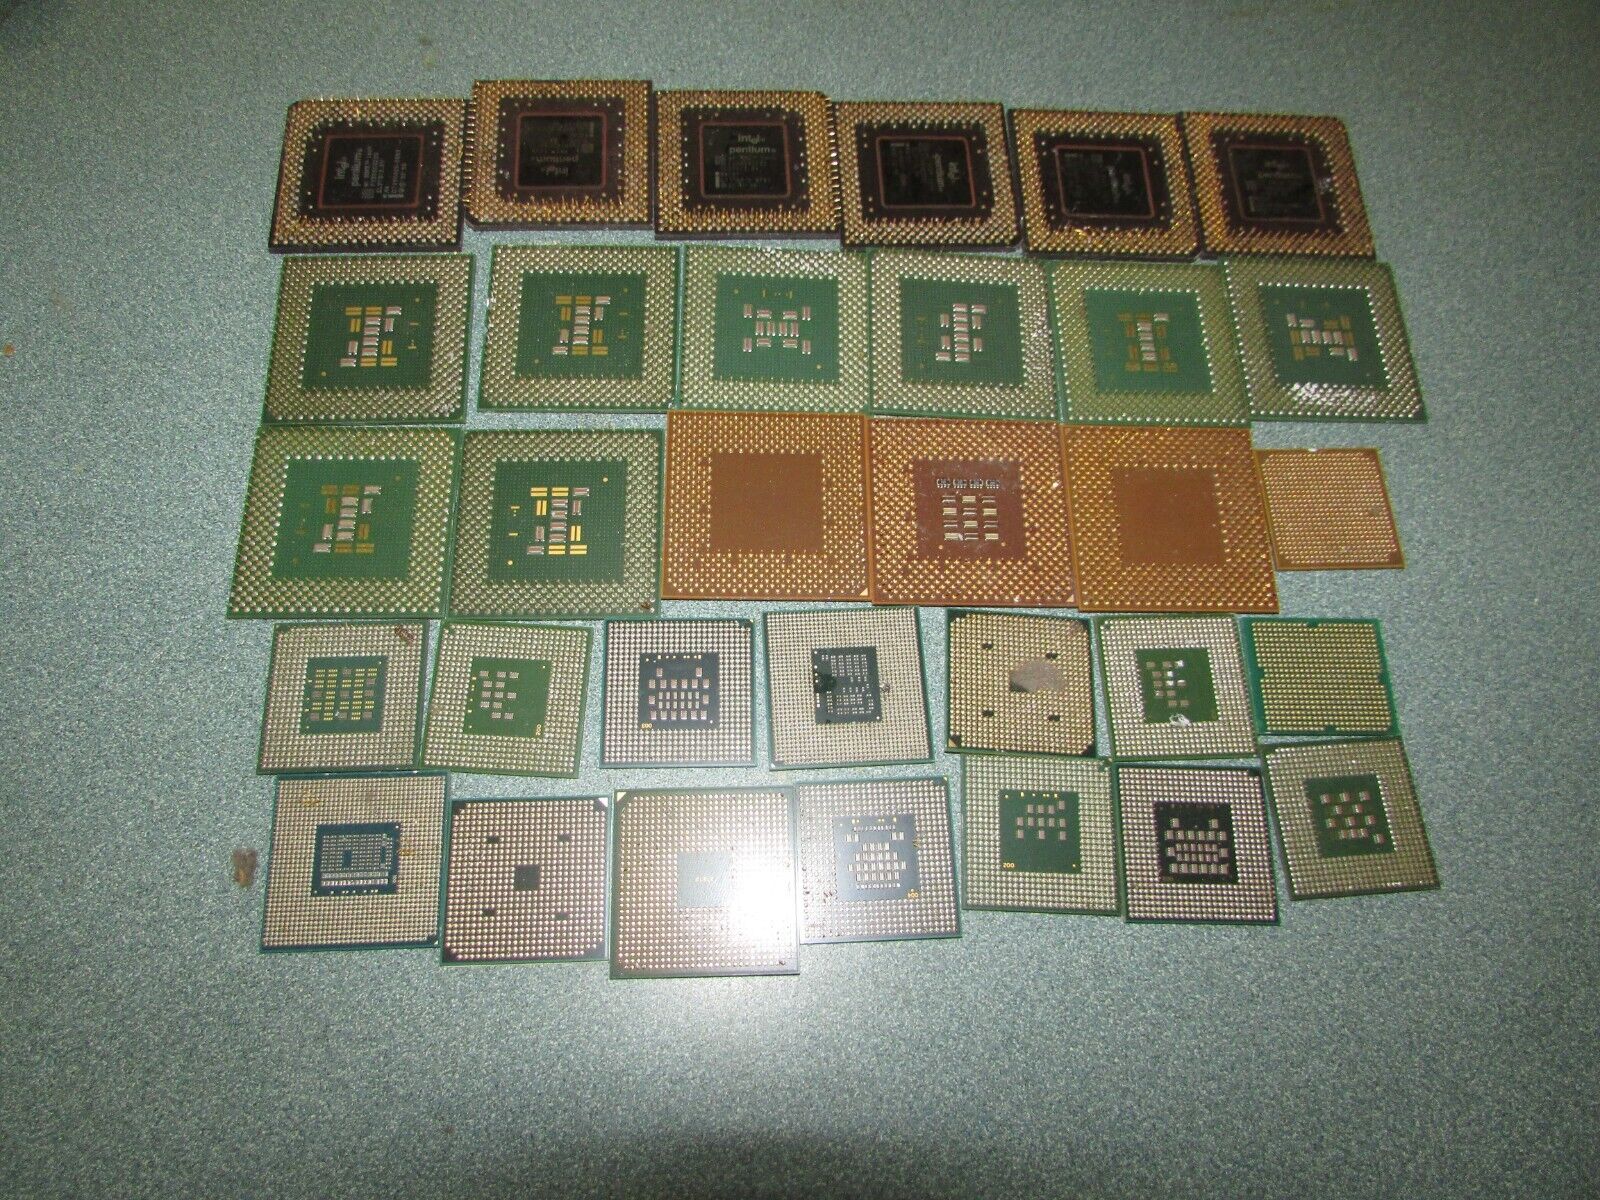 Lot of (32) 305 Grams Intel Processors With Gold Pins For Scrap Gold Recovery